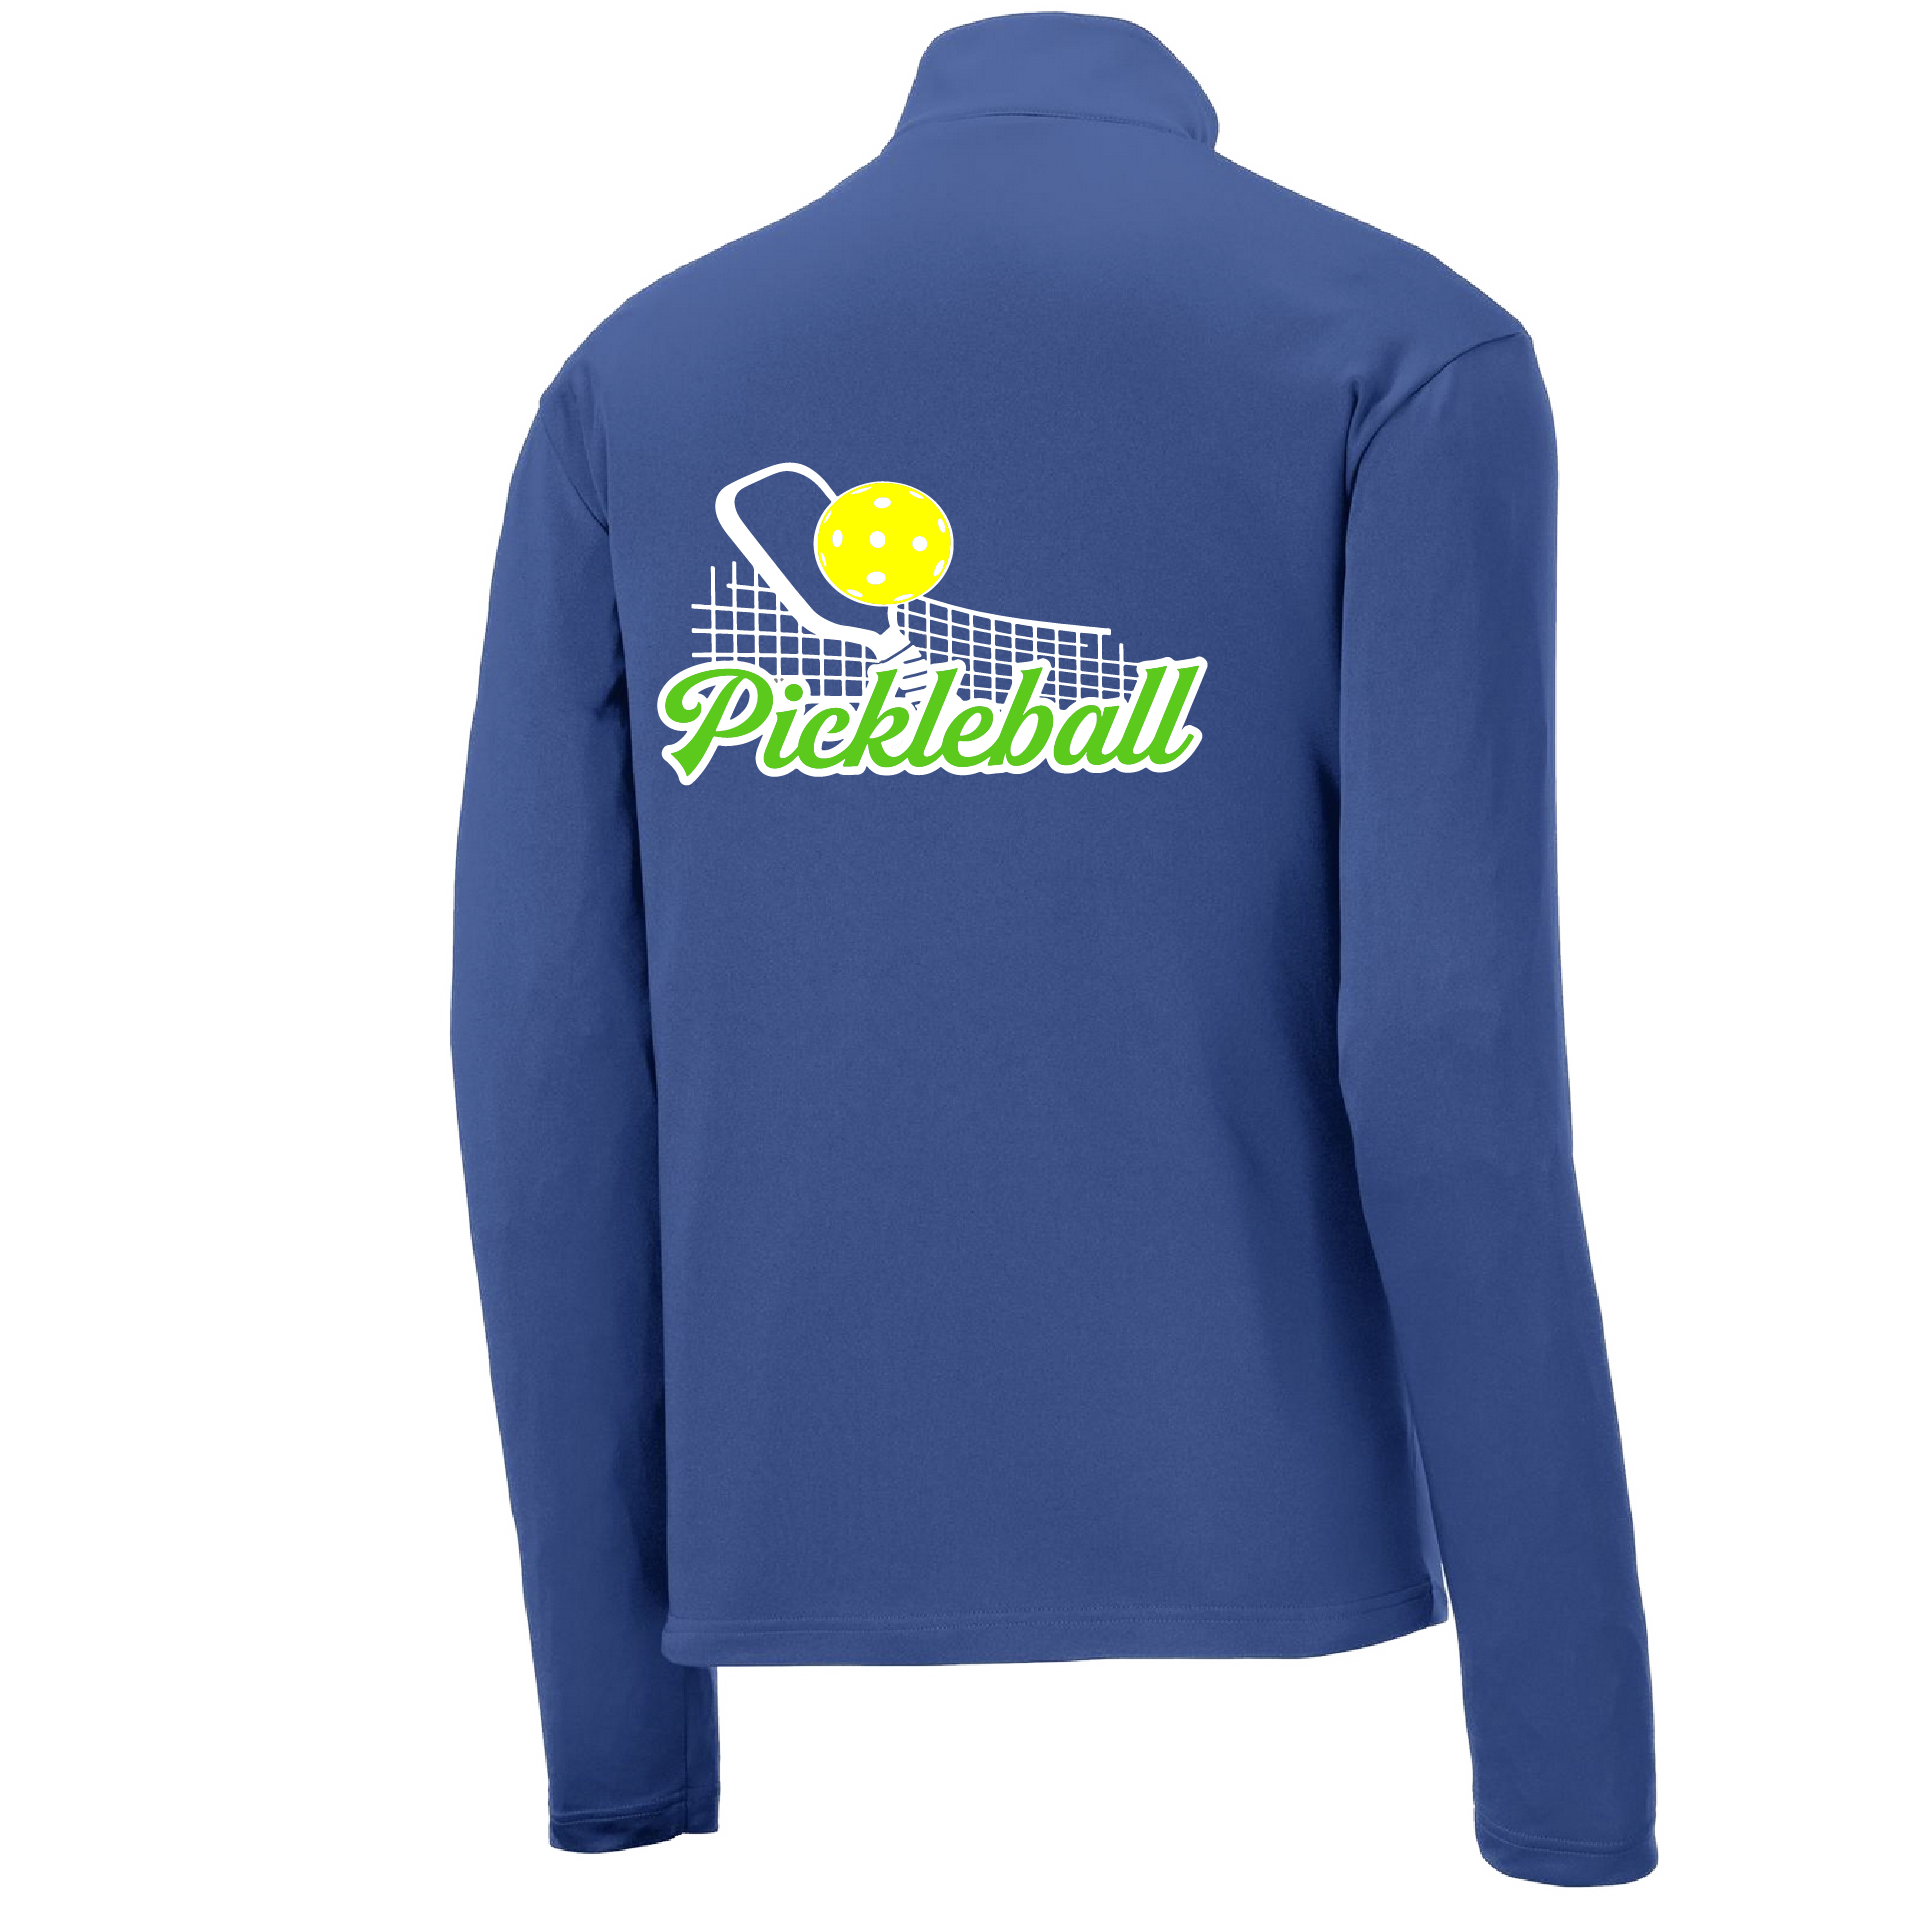 Pickleball Design: Pickleball Net  Men's 1/4-Zip Pullover  Turn up the volume in this Men's shirt with its perfect mix of softness and attitude. Material is ultra-comfortable with moisture wicking properties and tri-blend softness. PosiCharge technology locks in color. Highly breathable and lightweight. Versatile enough for wearing year-round.